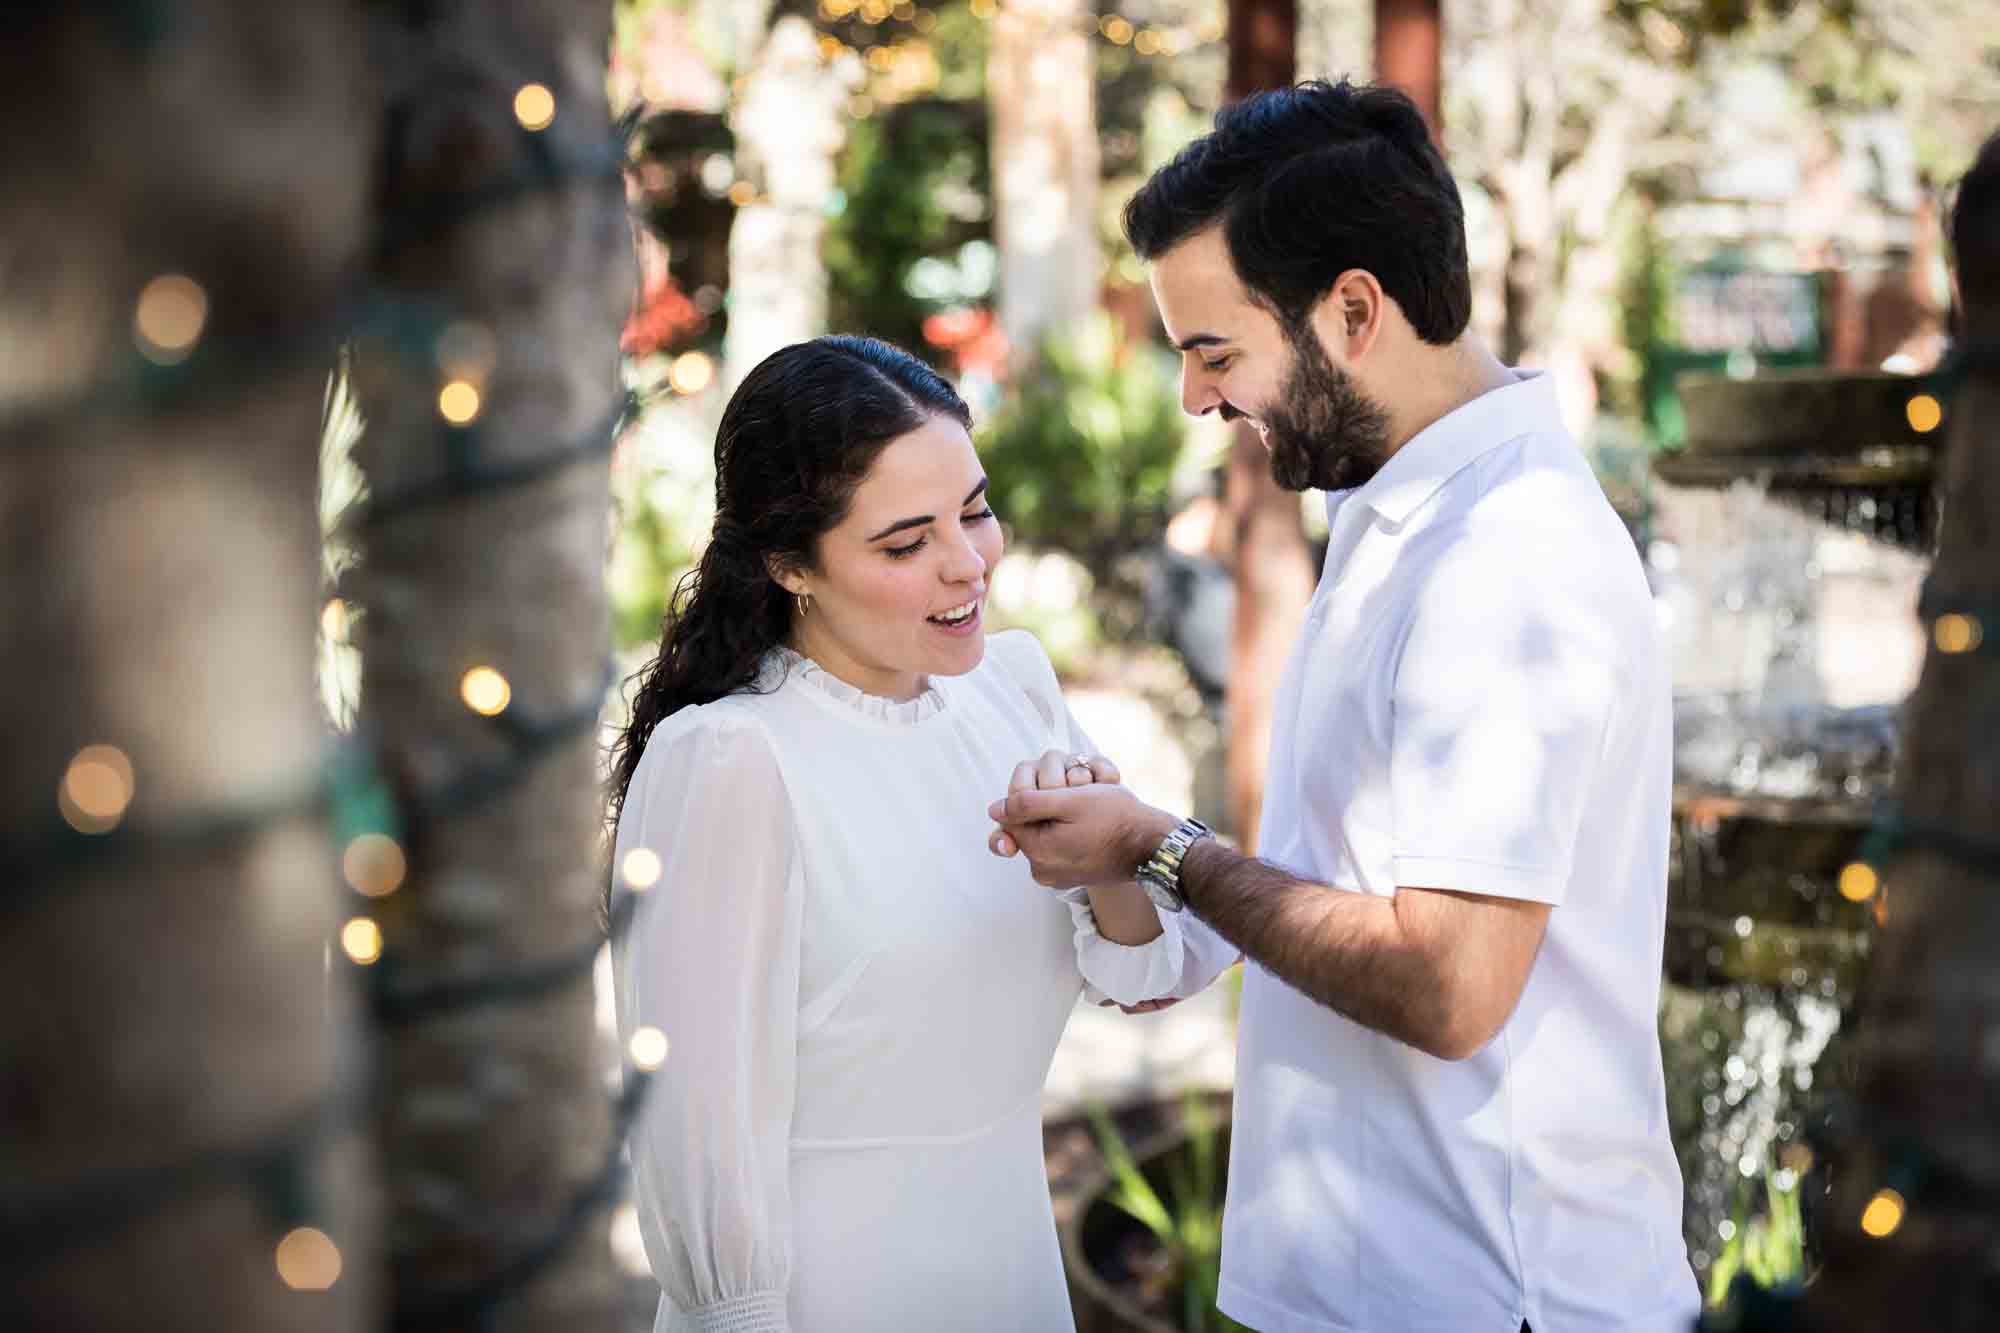 Couple looking down at woman's hand showing engagement ring during a Pearl engagement portrait session